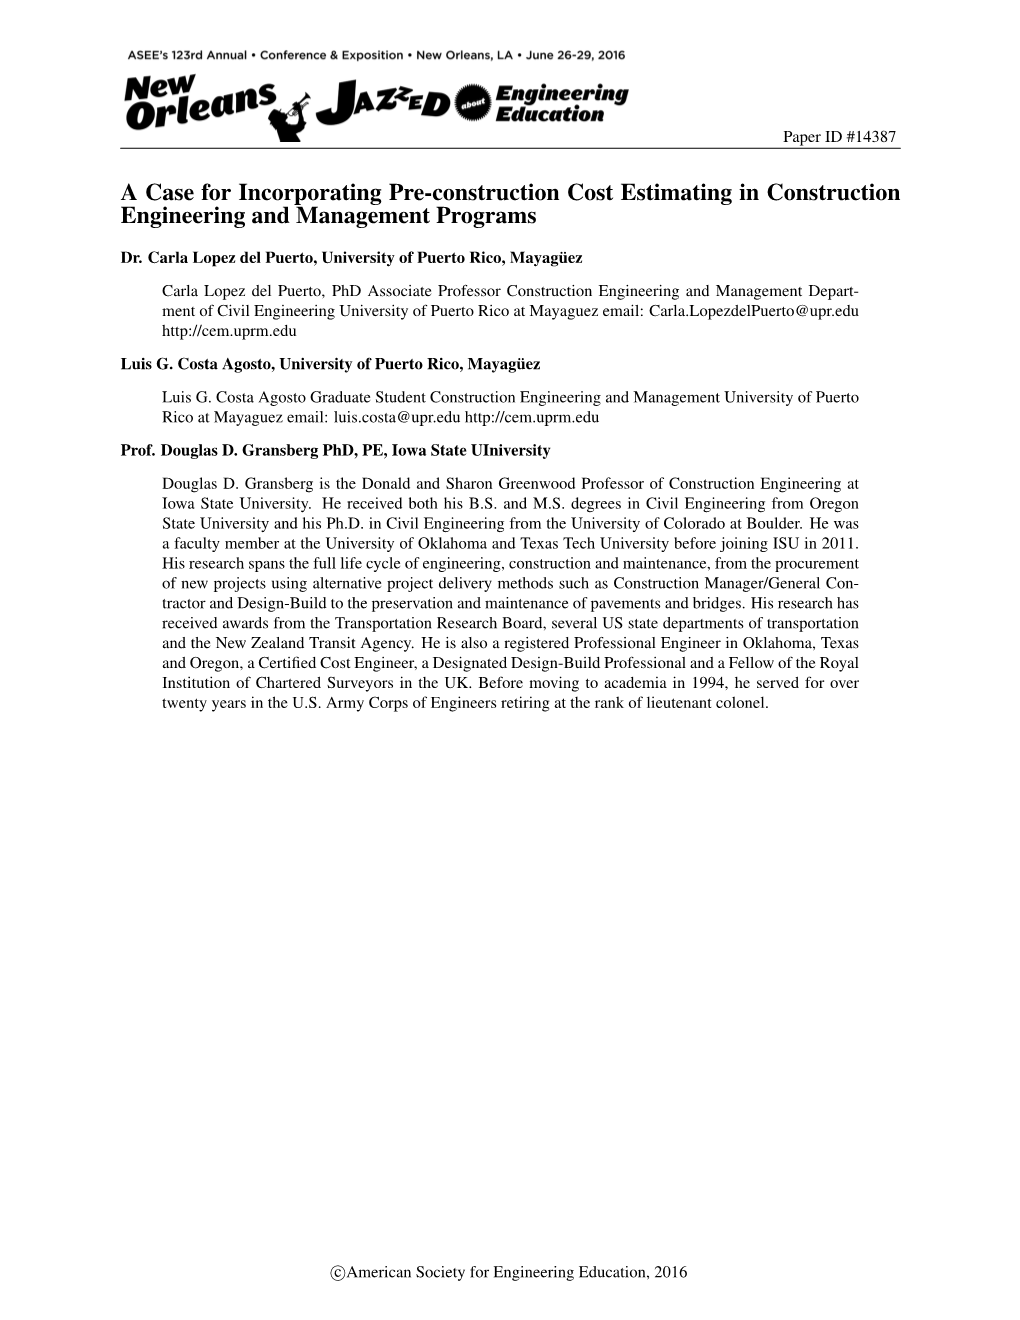 A Case for Incorporating Pre-Construction Cost Estimating in Construction Engineering and Management Programs